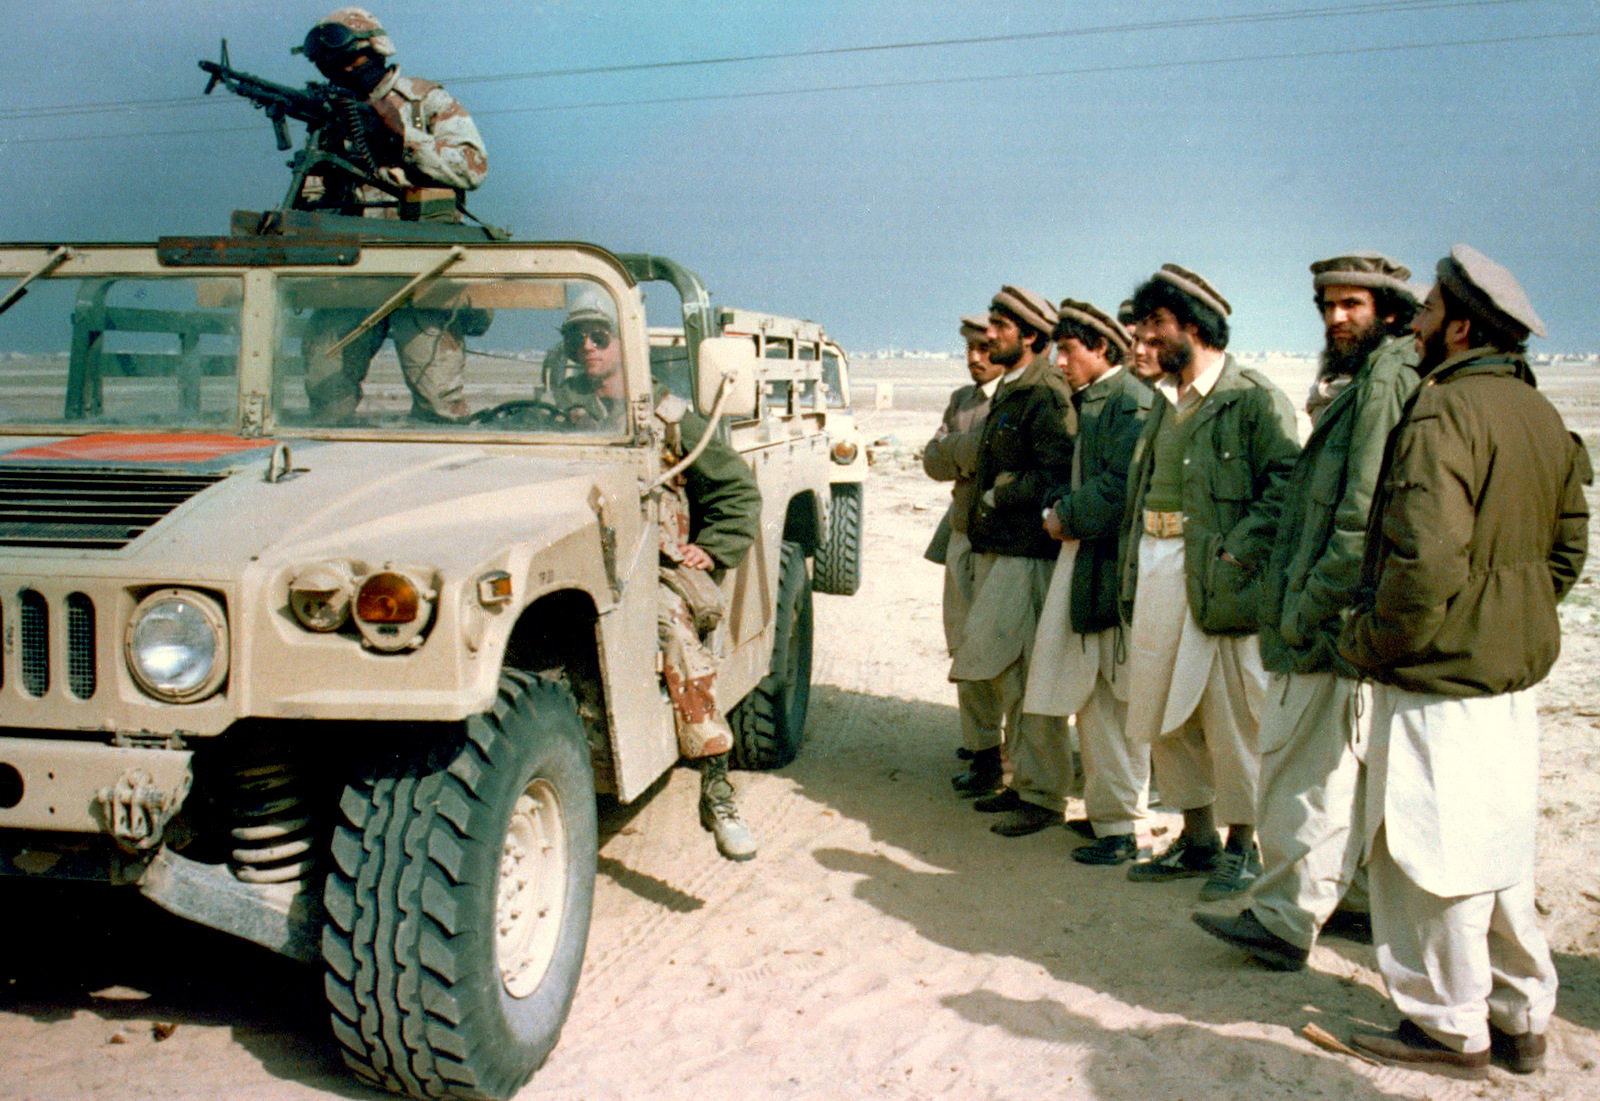  A group of Afghan mujahedeens, Islamic guerrillas, look over a U.S. Marine humvee in eastern Saudi Arabia, Monday, Feb. 11, 1991. The Marines visited a camp consisting of about 300 mujahedeens who have been asked by the Saudi government to help fight against Iraq in the Gulf War. (AP Photo/Department of Defense)